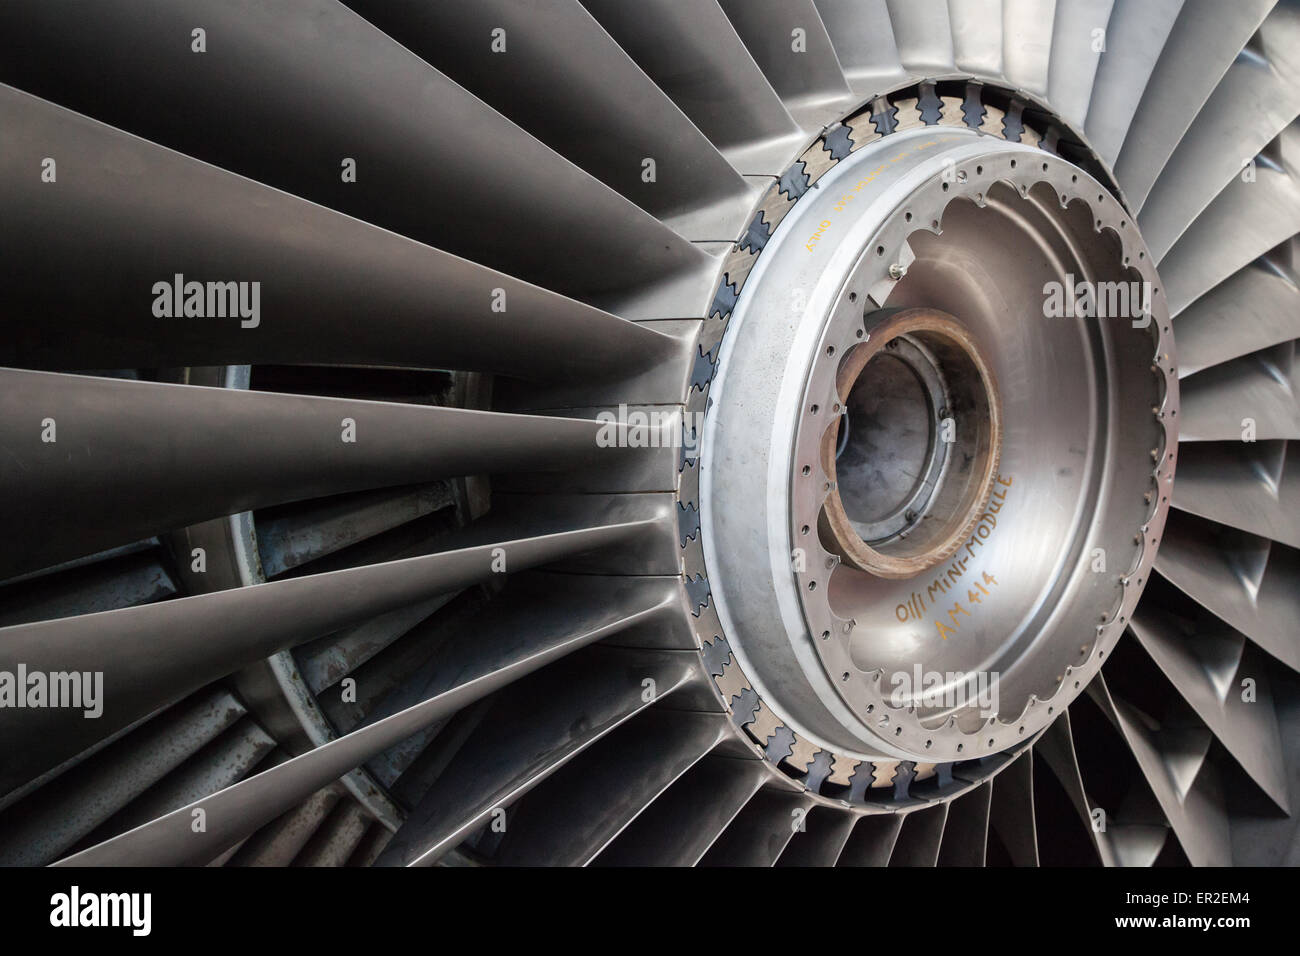 A view of the front fan from a Rolls-Royce RB211 turbofan engine. Stock Photo